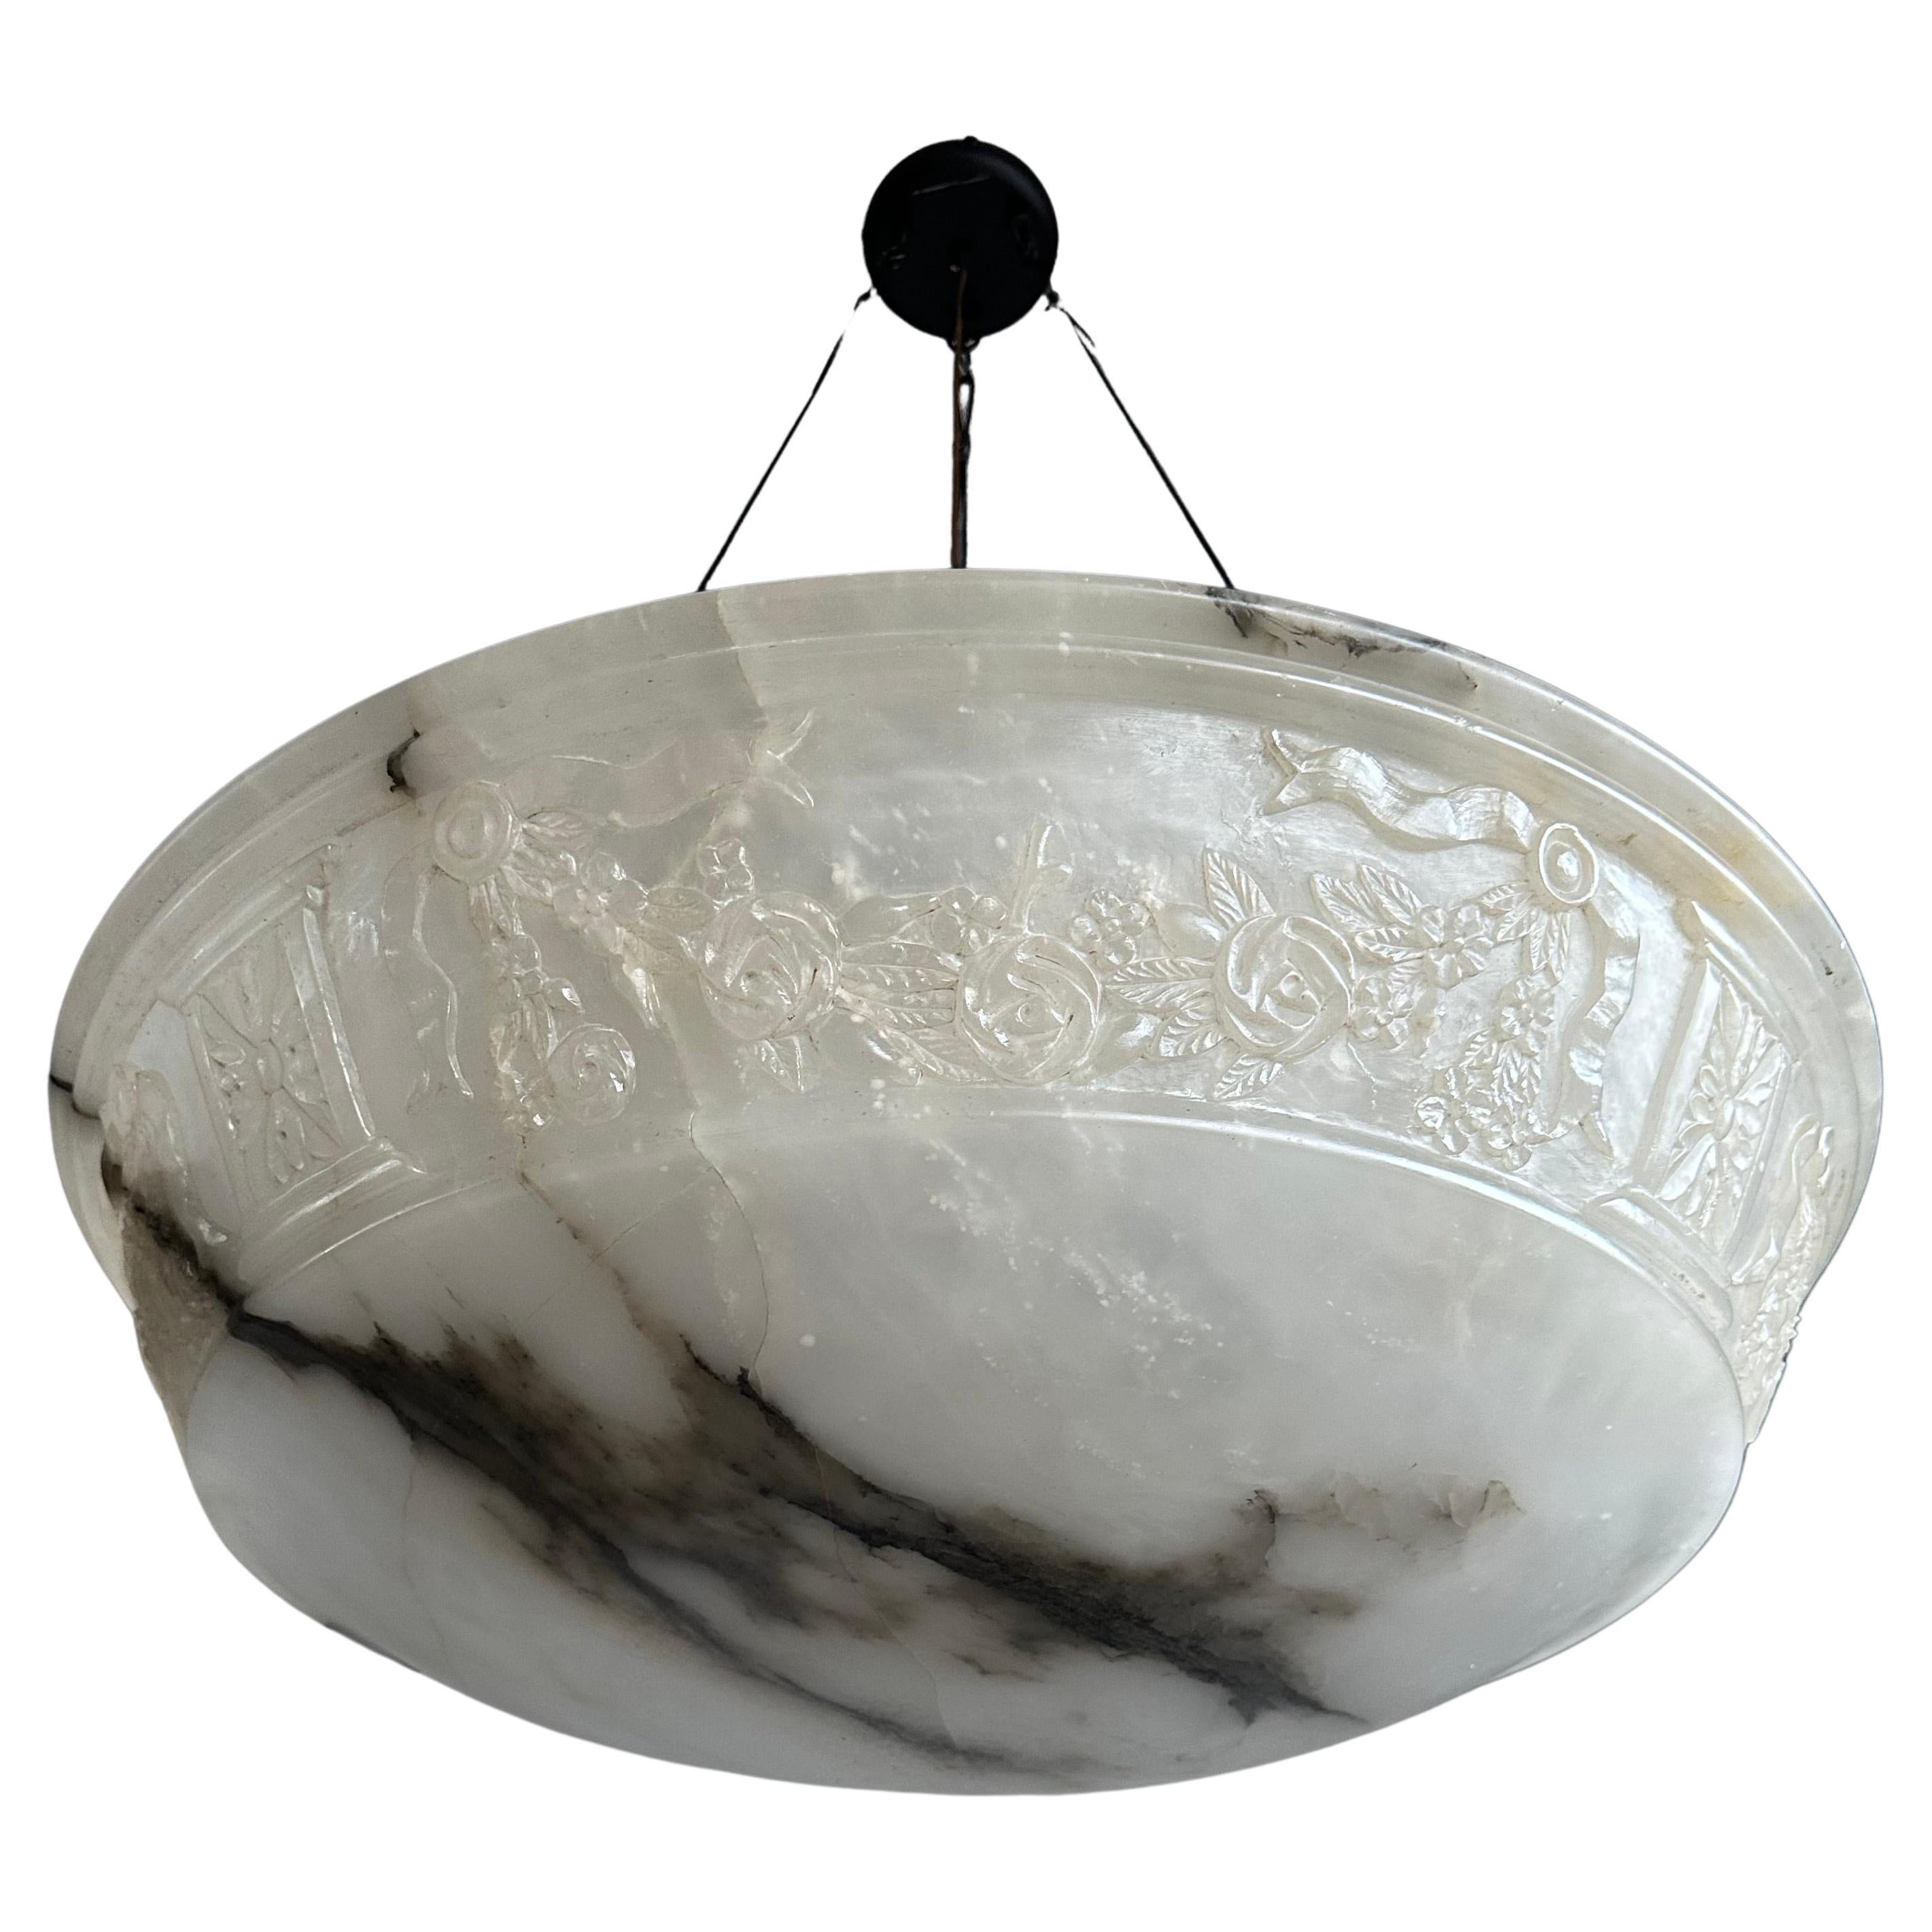 Top class chandelier with unique alabaster handcarved shade / bowl and perfect hanging.

Thanks to its largest size ever and good condition this alabaster chandelier will light up your days and evenings in a way that no modern fixture ever could.